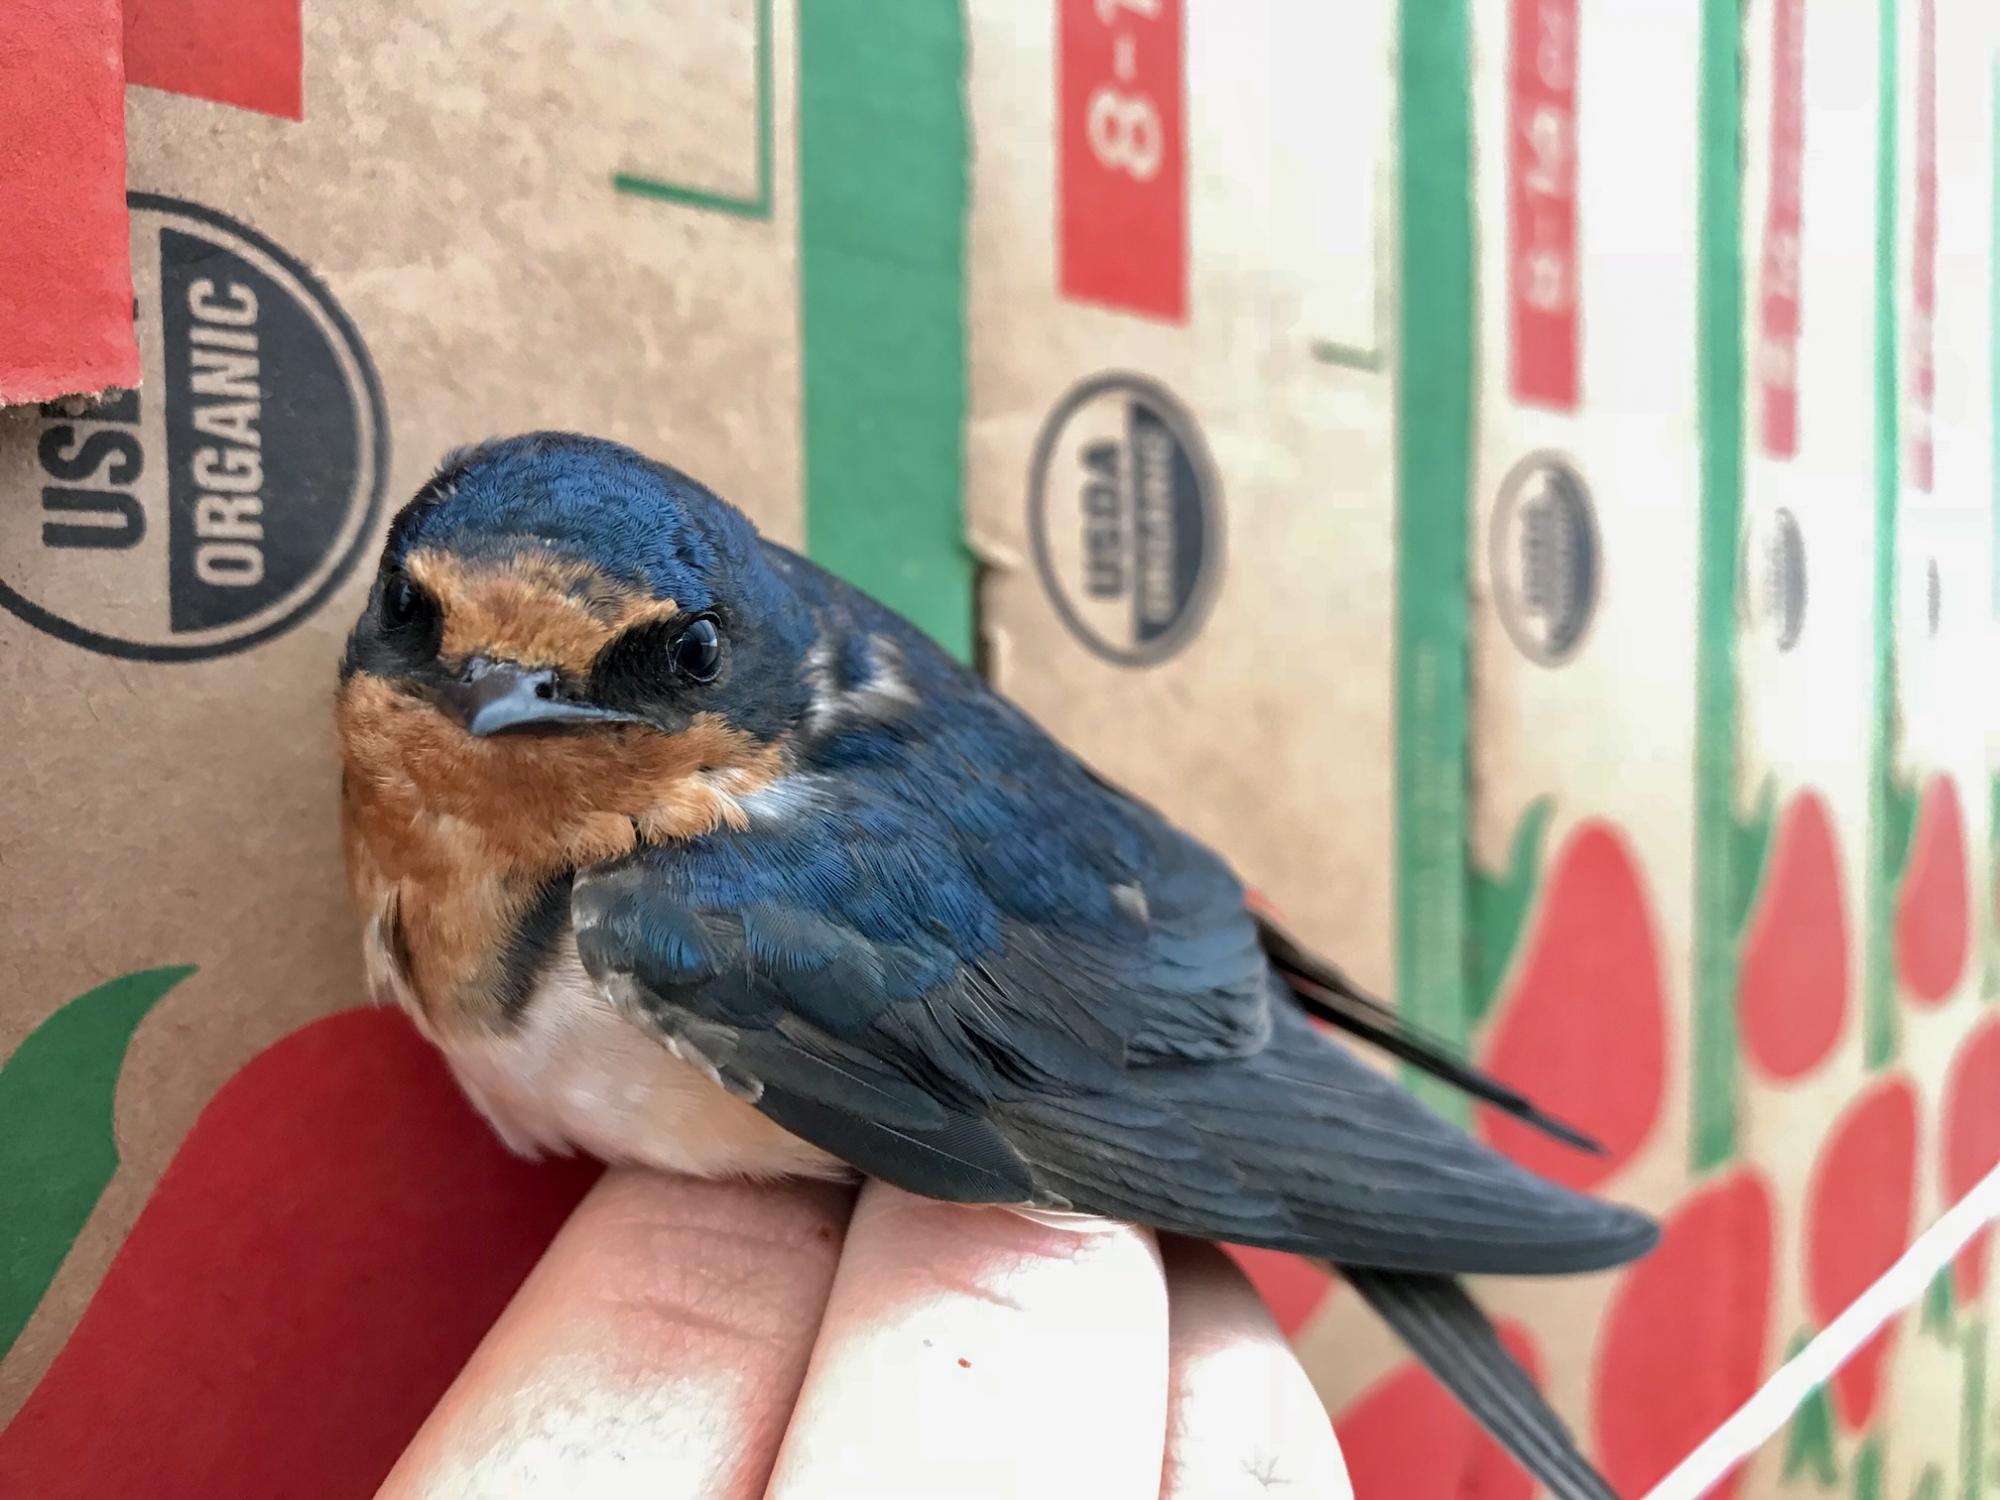 A barn swallow perches on a hand by boxes for strawberries. Barn swallows tend to swoop over the centers of strawberry farms to eat pests and other insects. (Elissa Olimpi/UC Davis)